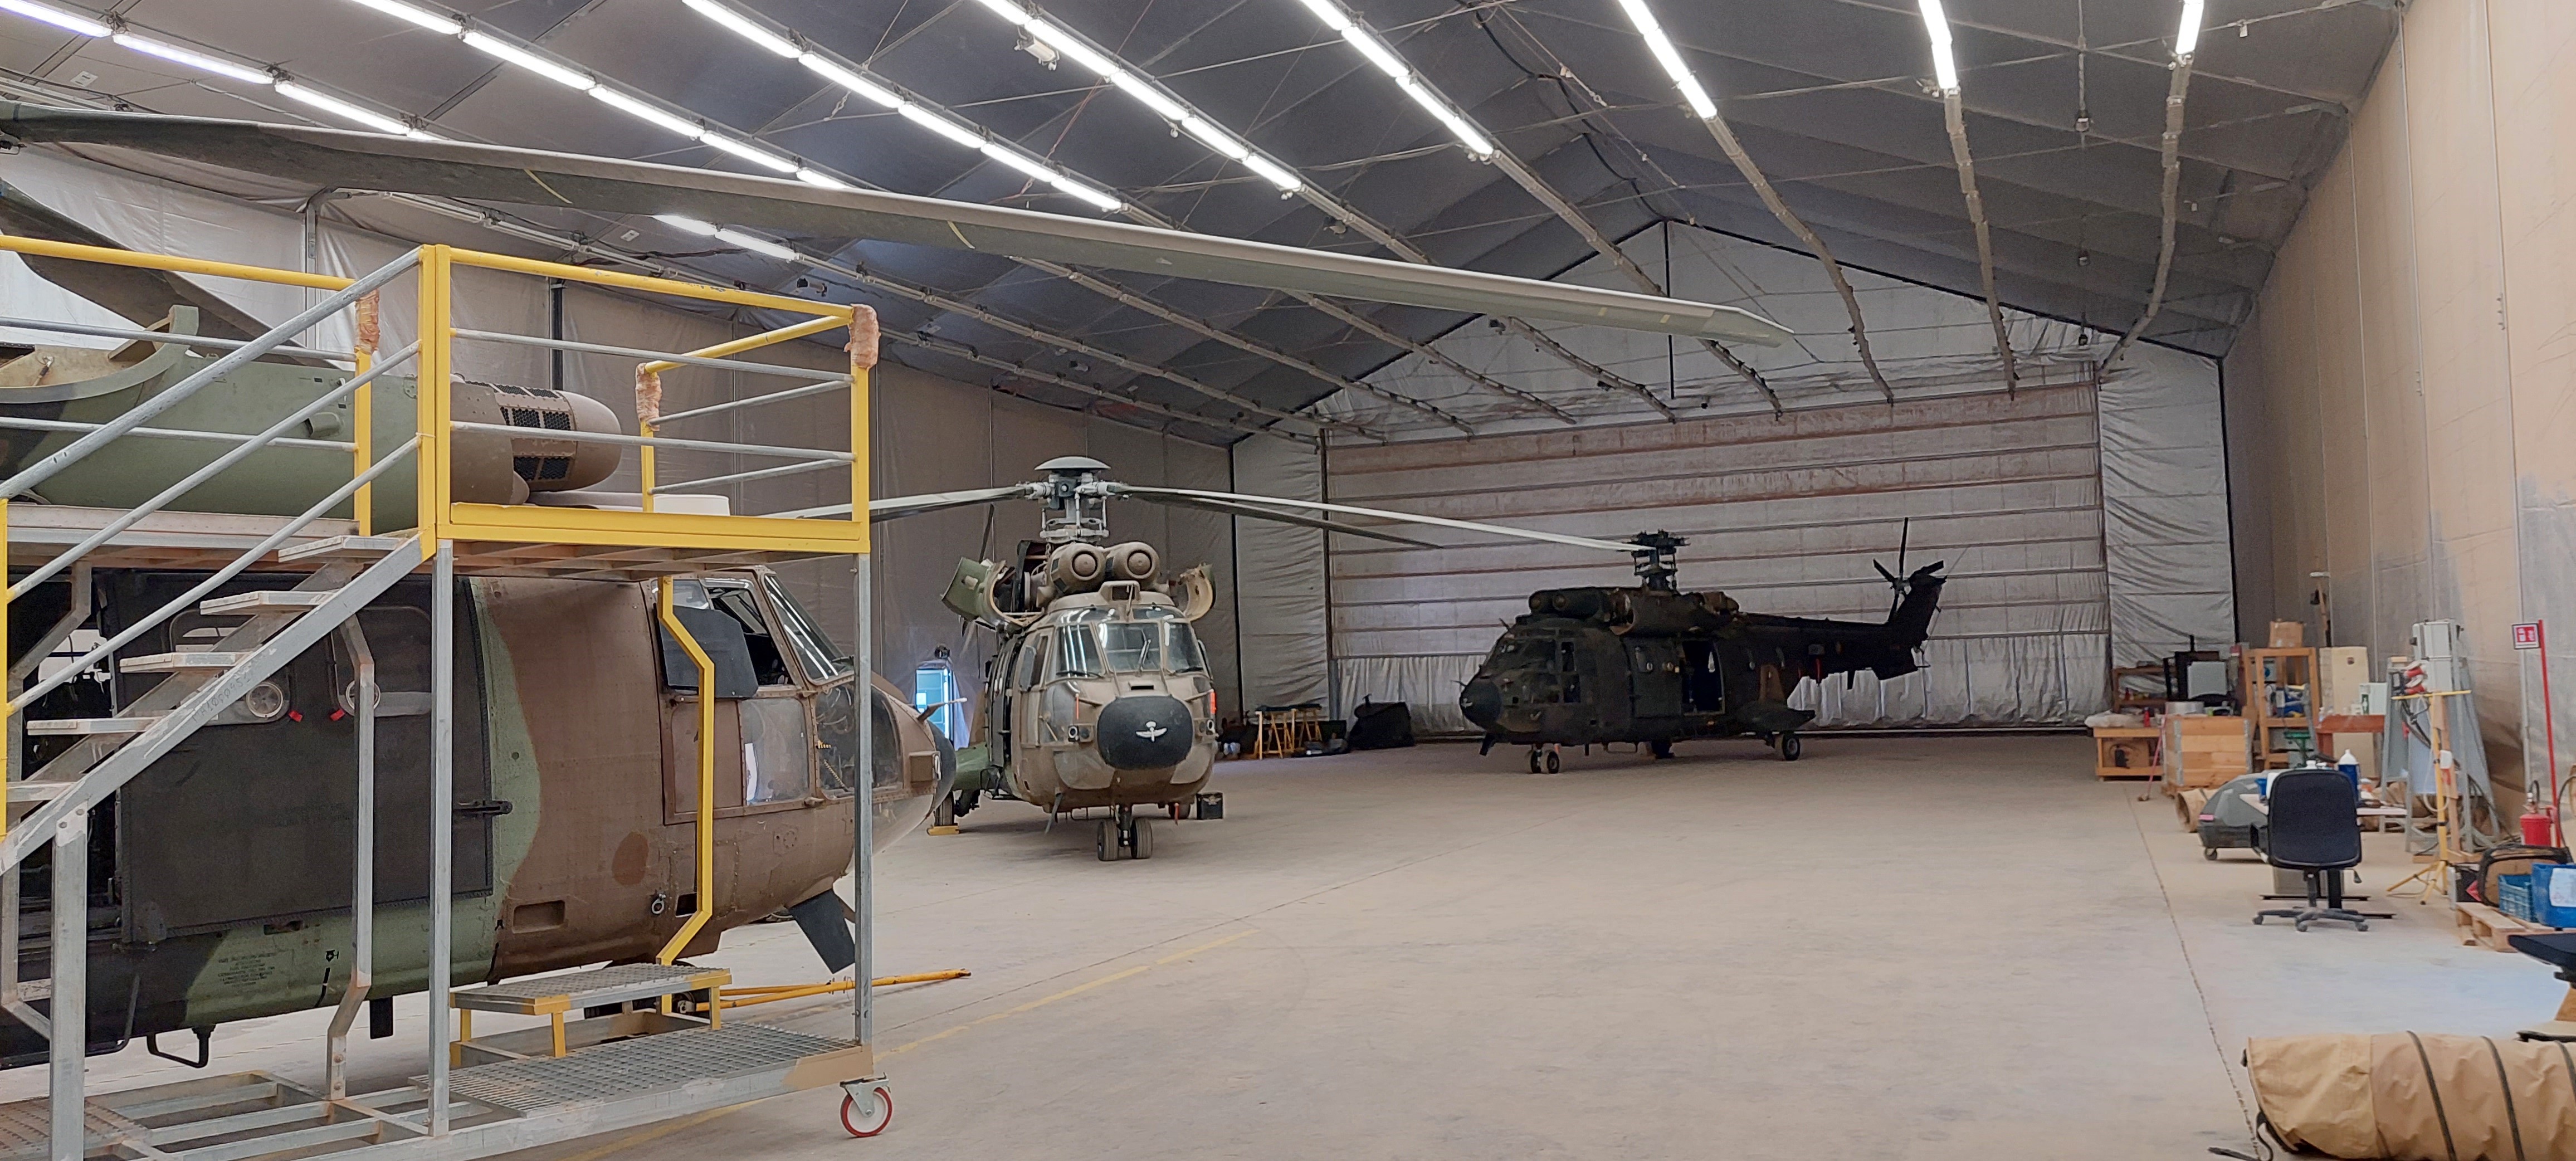 Main hangar with capacity for three HT27 Cougar helicopters